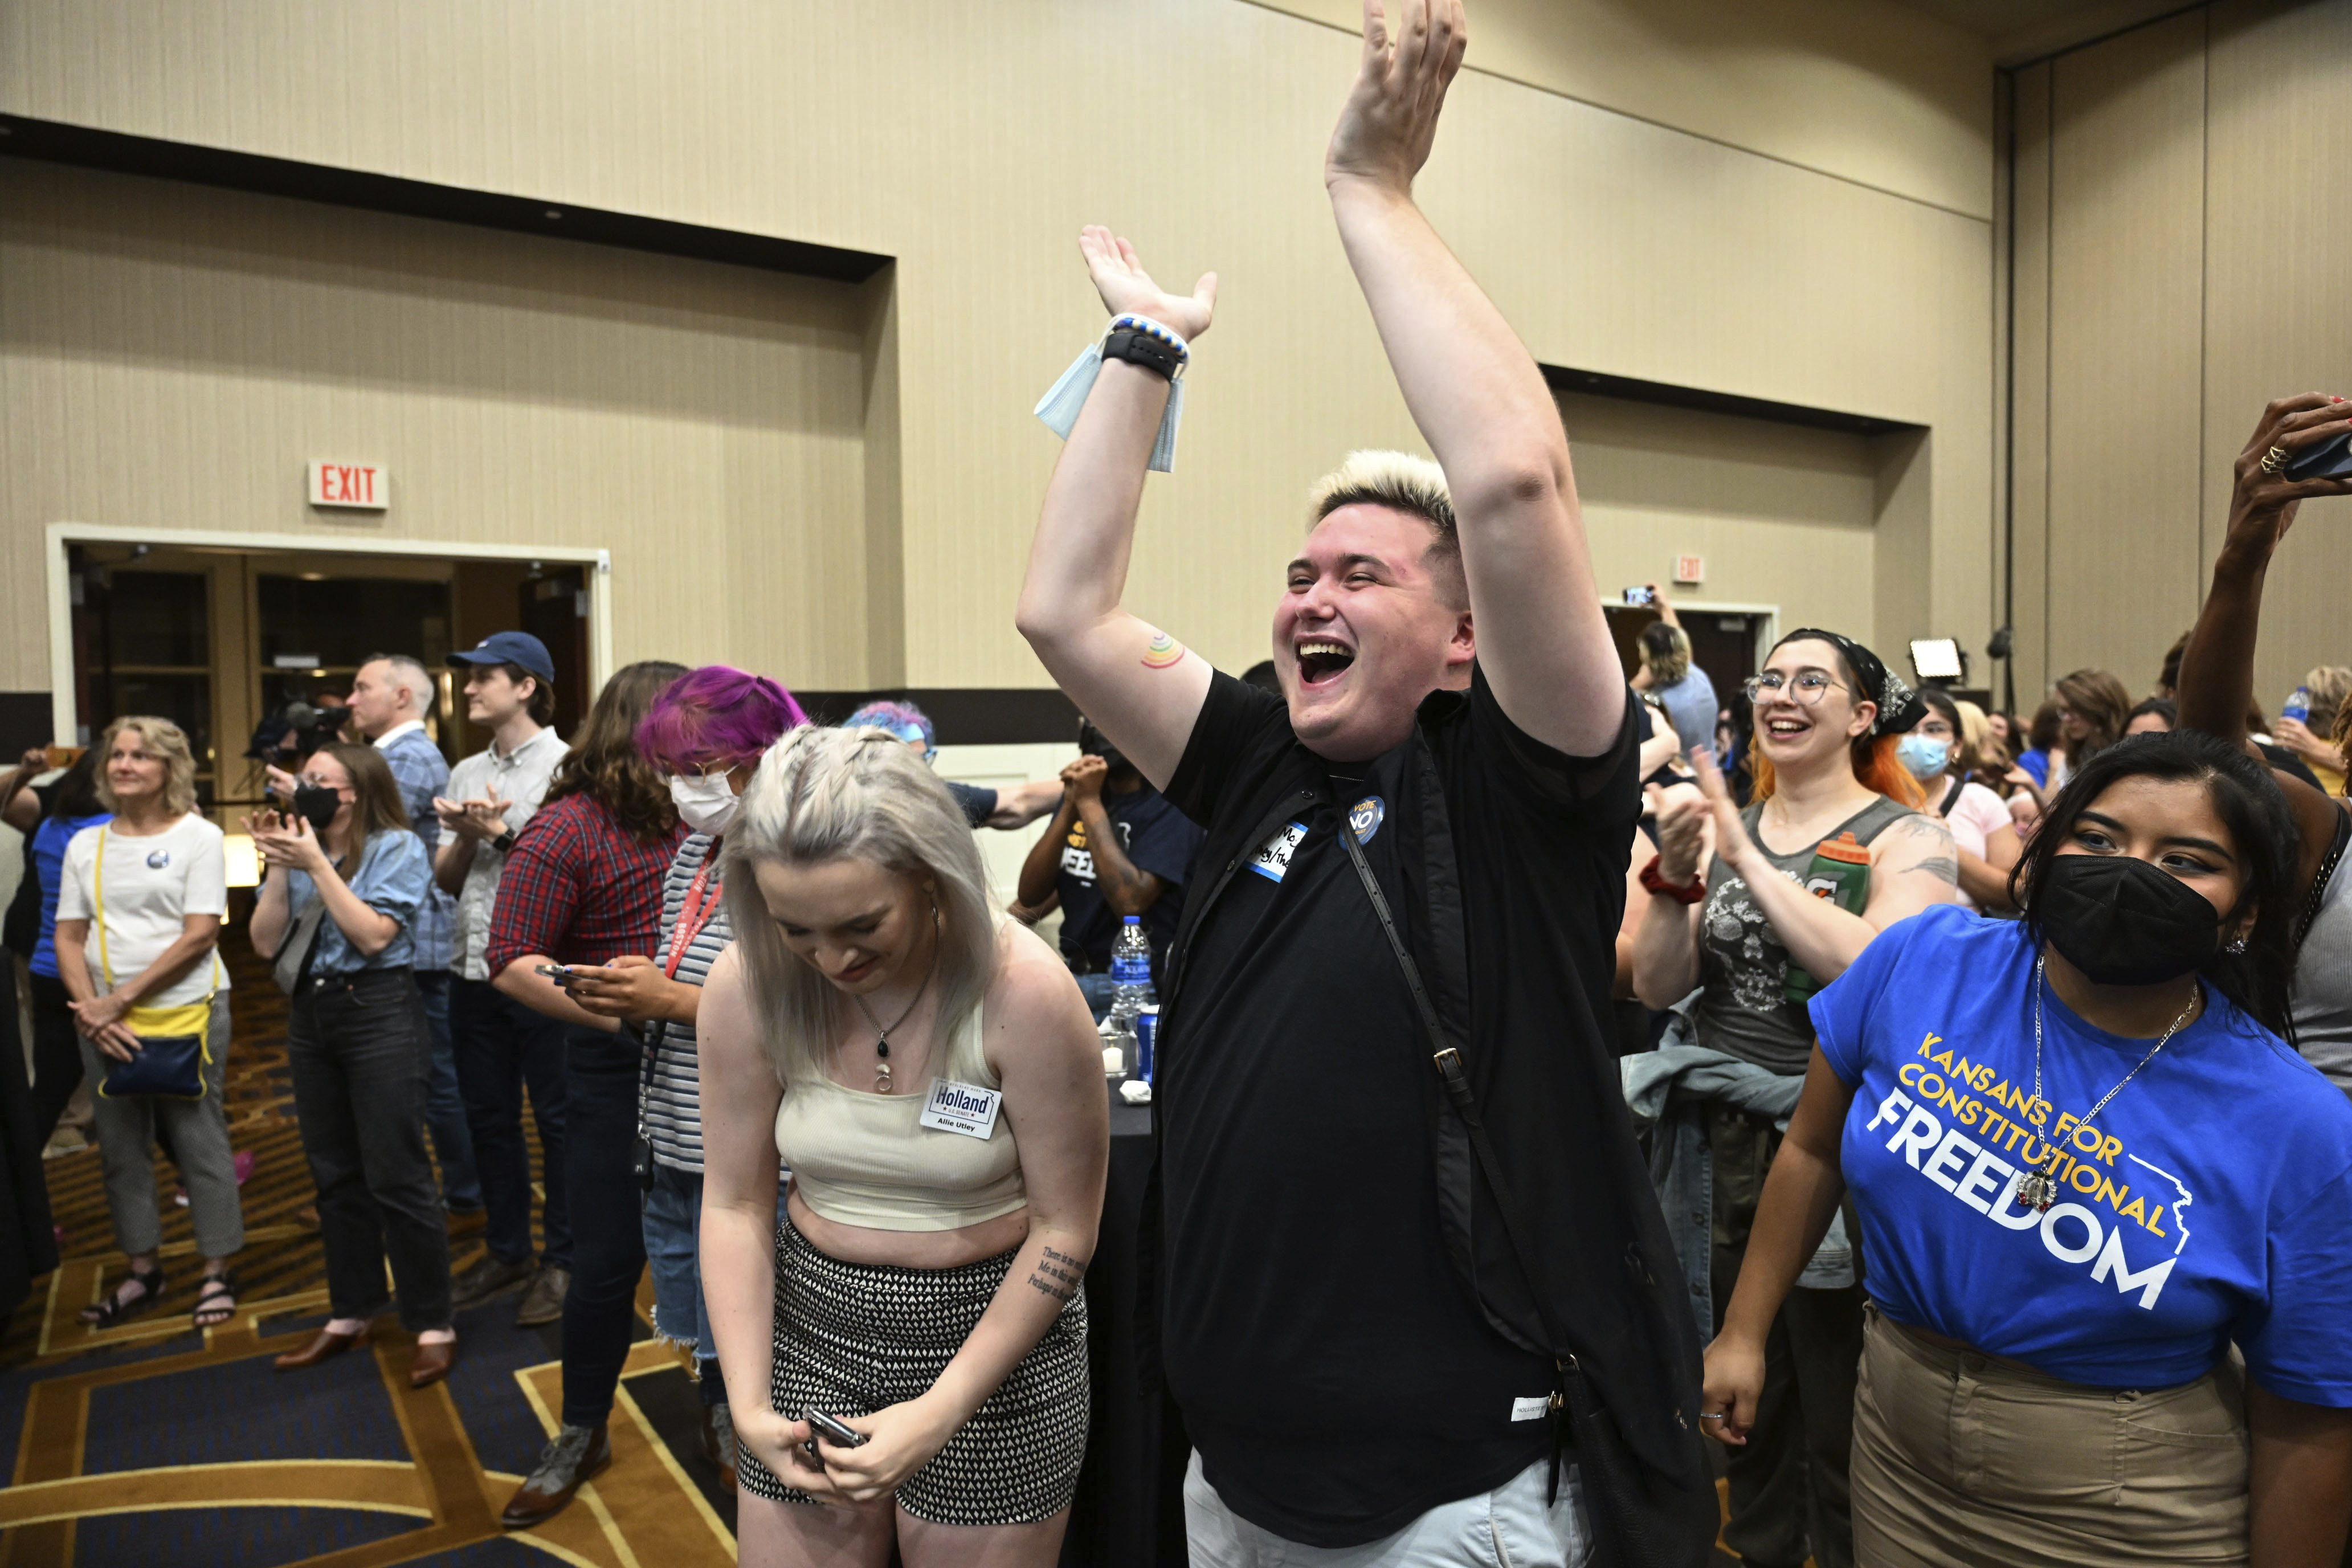 FILE - Allie Utley, left, and Jae Moyer, center, of Overland Park, react during a primary watch party Tuesday, Aug. 2, 2022, at the Overland Park, Kansas Convention Center. Kansas’ highest court on Friday, July 5, 2024, struck down state laws regulating abortion providers more strictly than other health care providers and banning a common second-trimester procedure, reaffirming its stance that the state constitution protects abortion access. (Tammy Ljungblad/The Kansas City Star via AP, File)